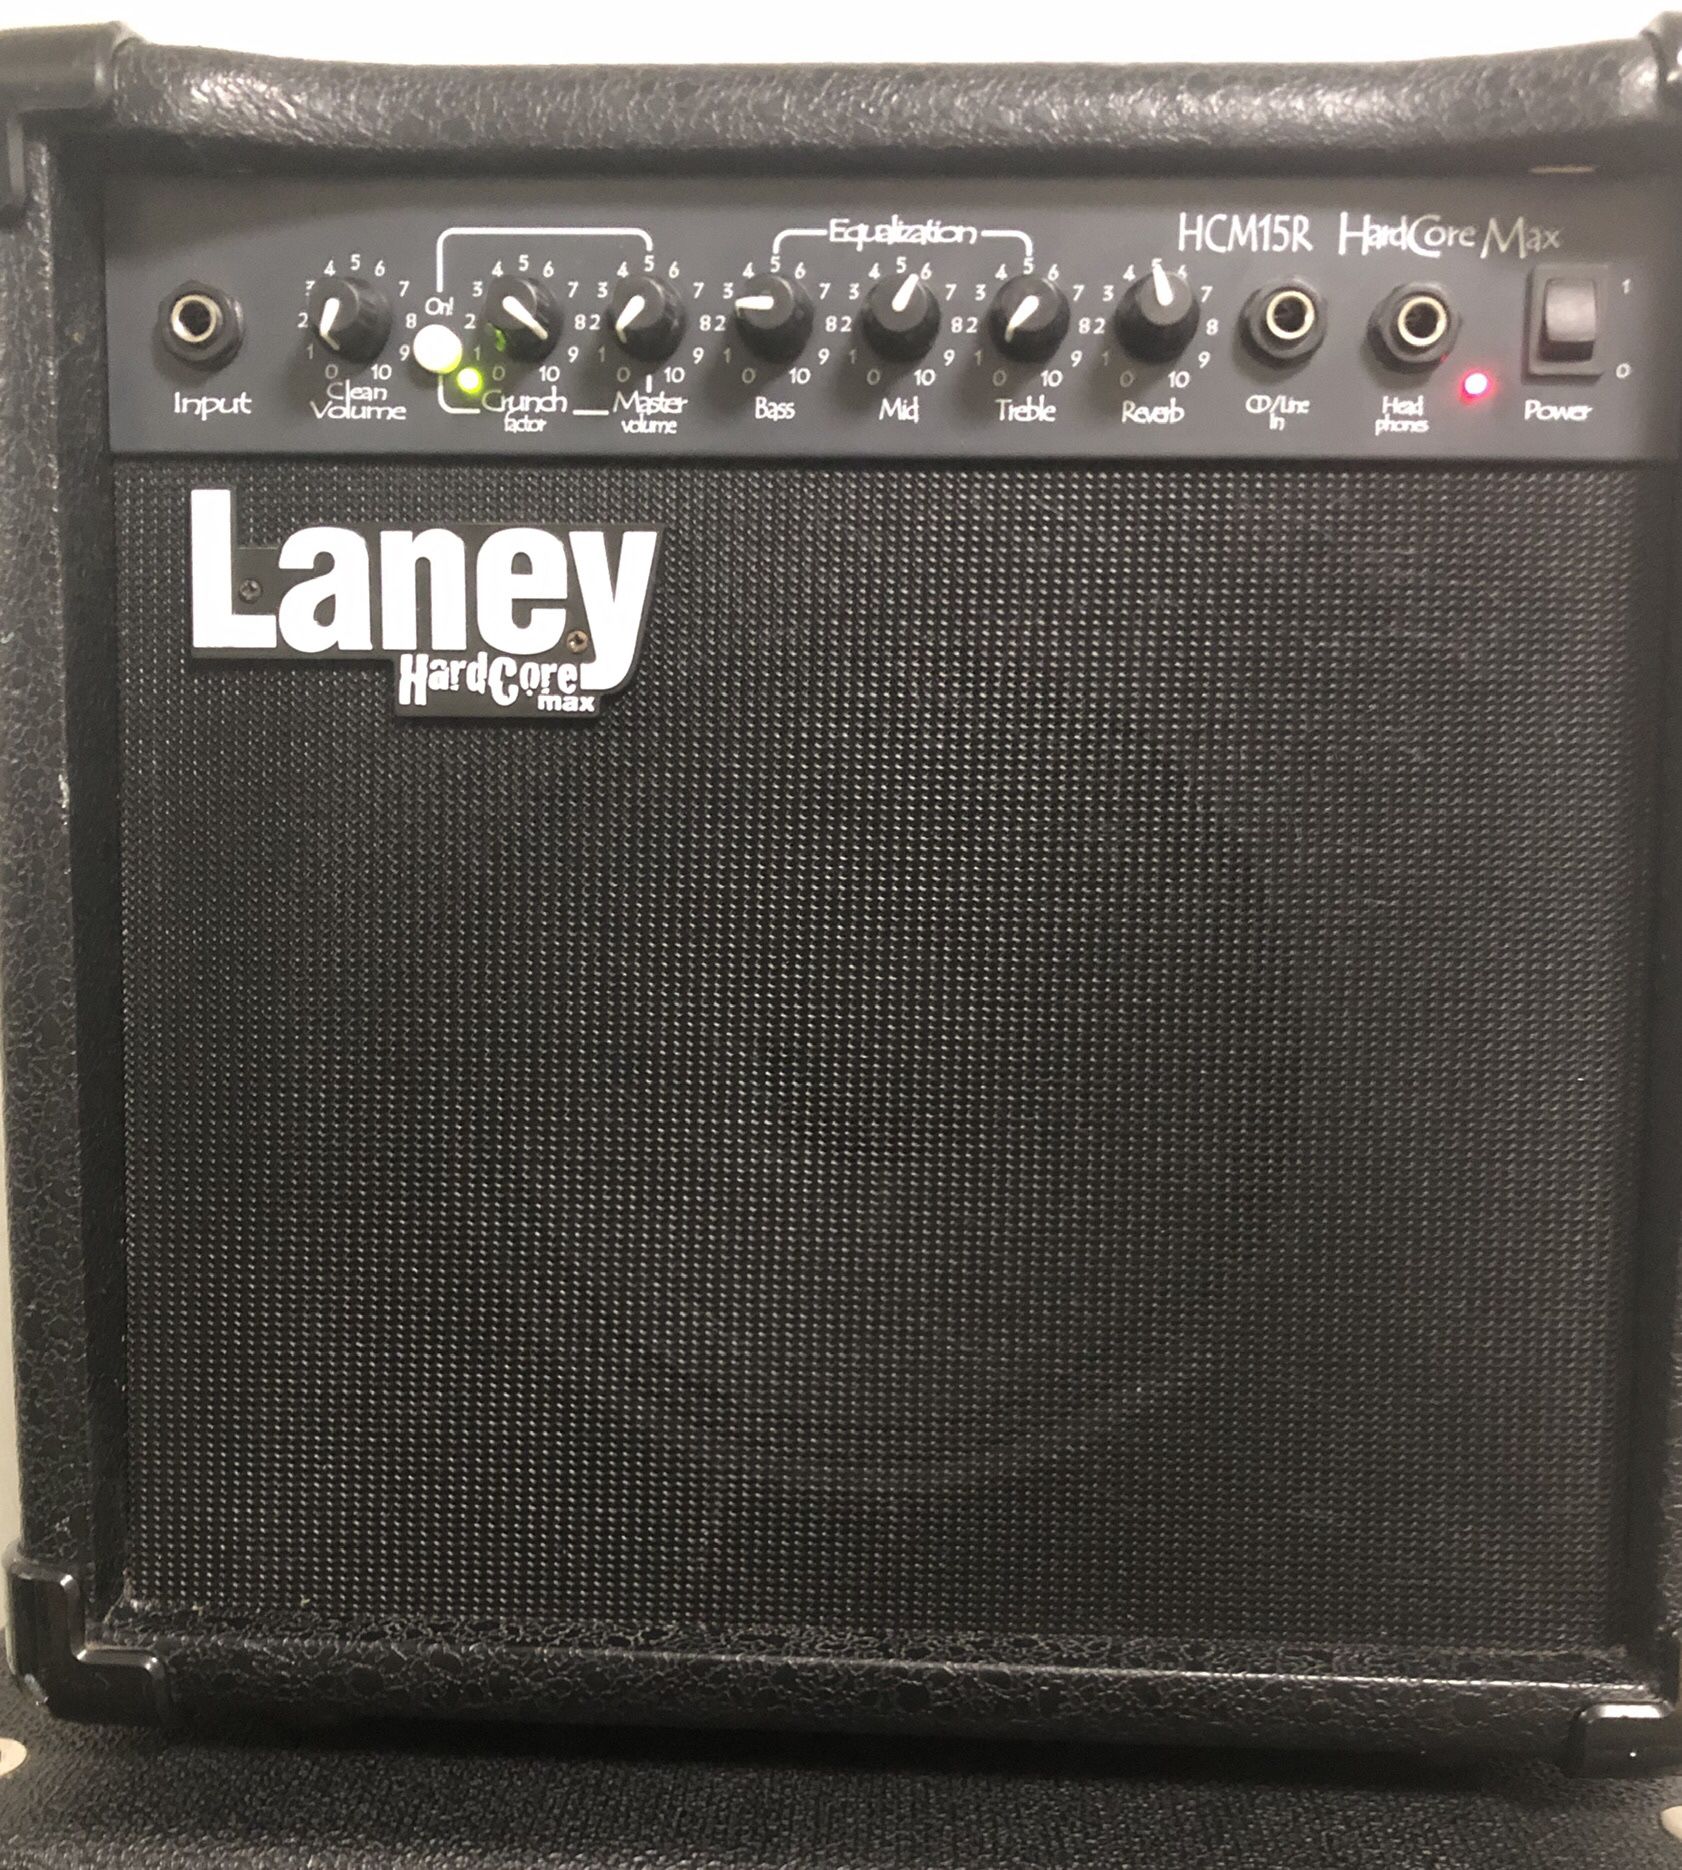 LANEY HCM15R Hardcore Max Guitar Combo 15 watts Amplifier, Like New, Excellent Sound, Guitar, Fender, Bass, Effects